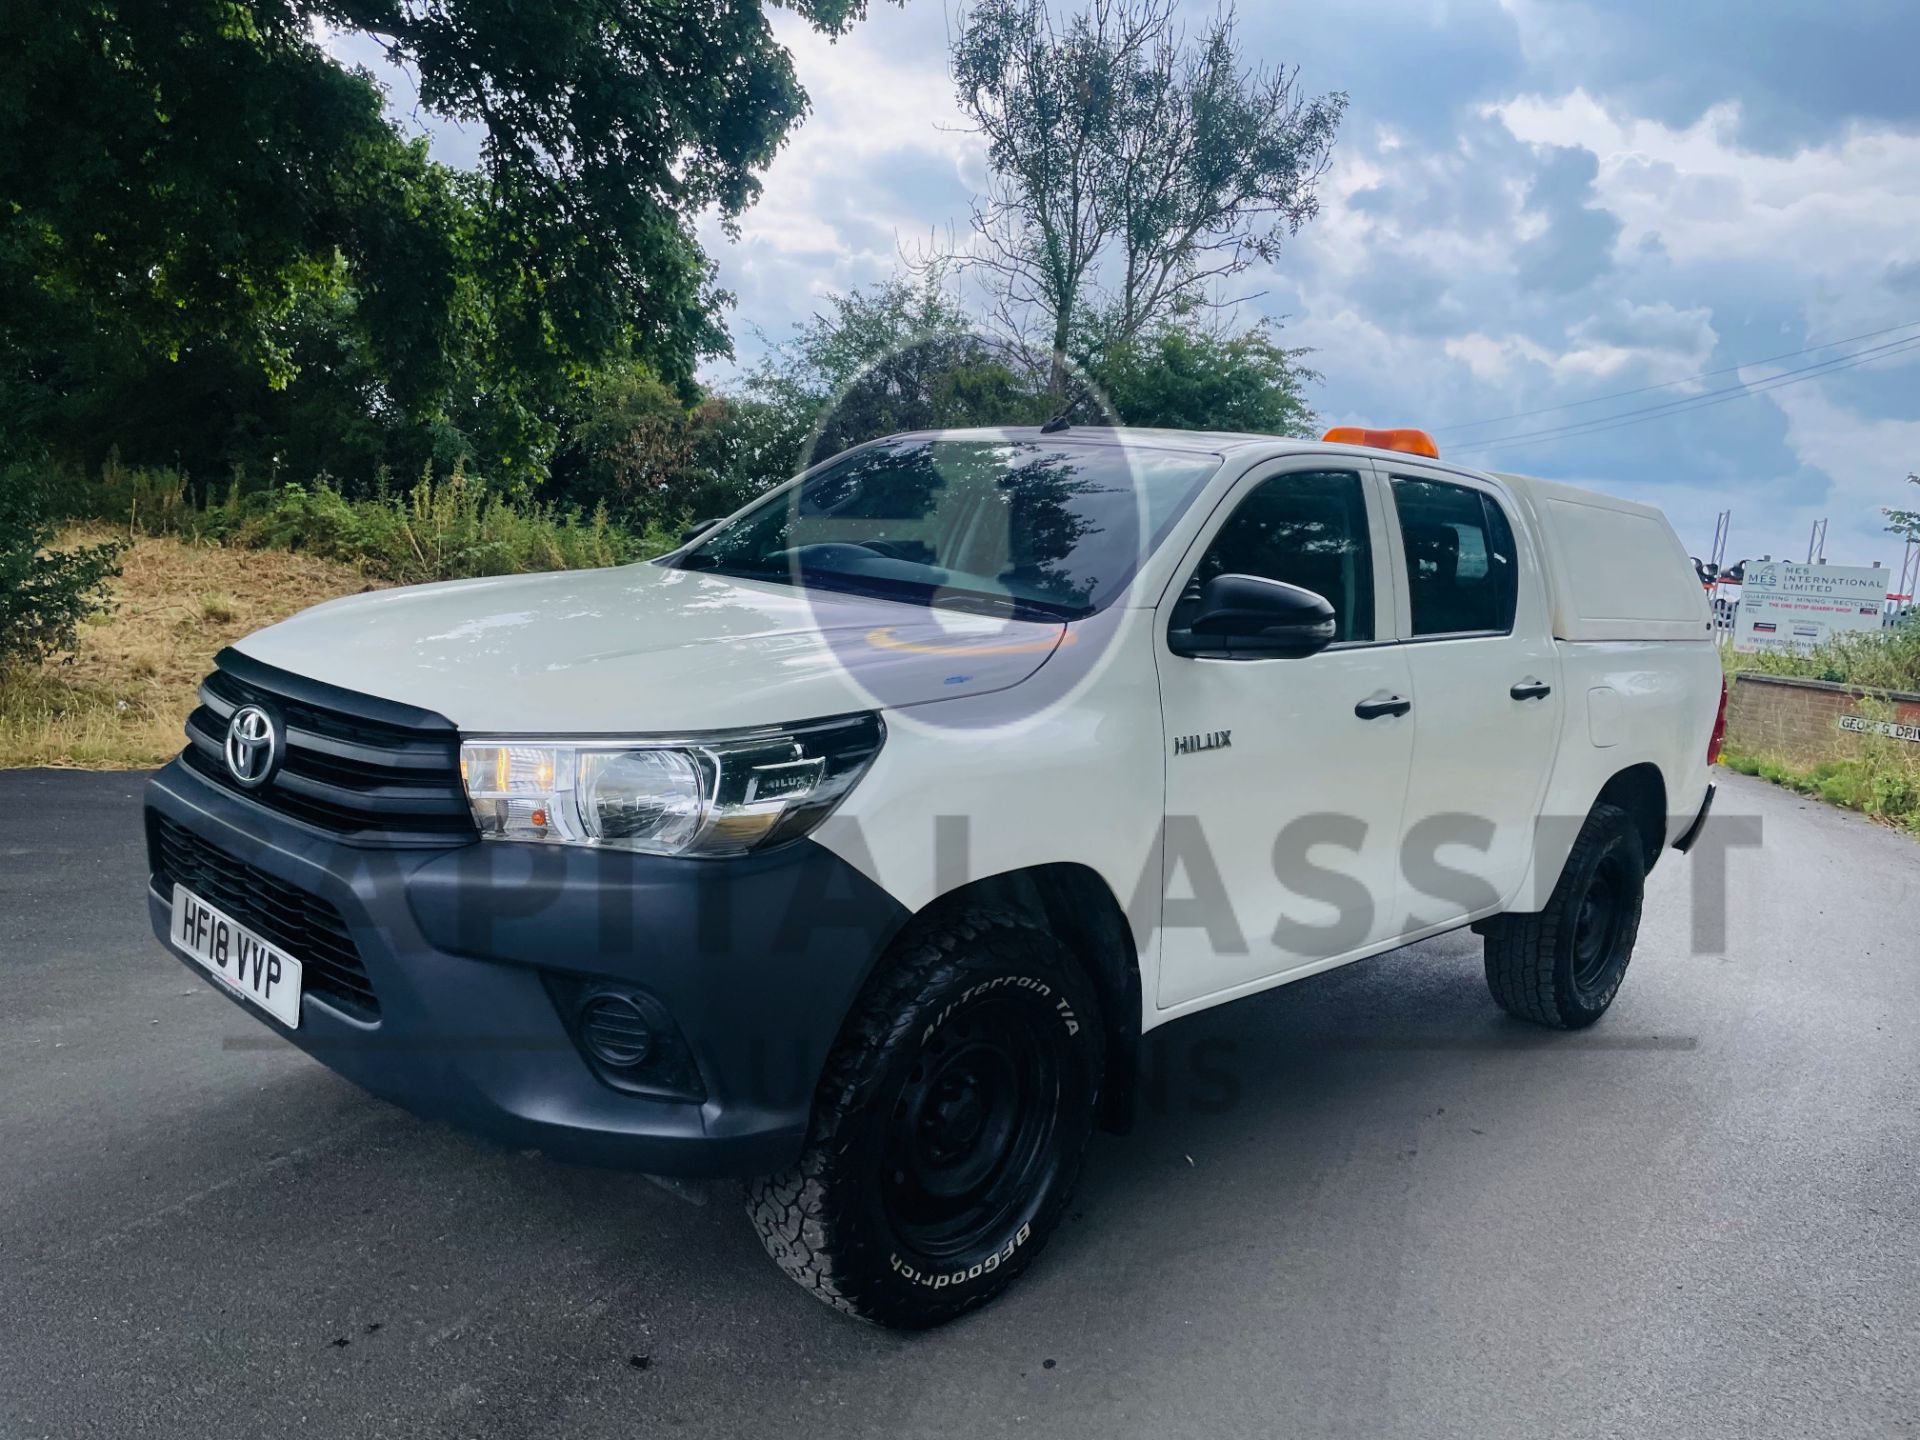 TOYOTA HILUX *DOUBLE CAB PICK-UP* (2018 - EURO 6) 2.4 D4-D - 6 SPEED (1 OWNER) *ULTRA LOW MILES* - Image 3 of 40